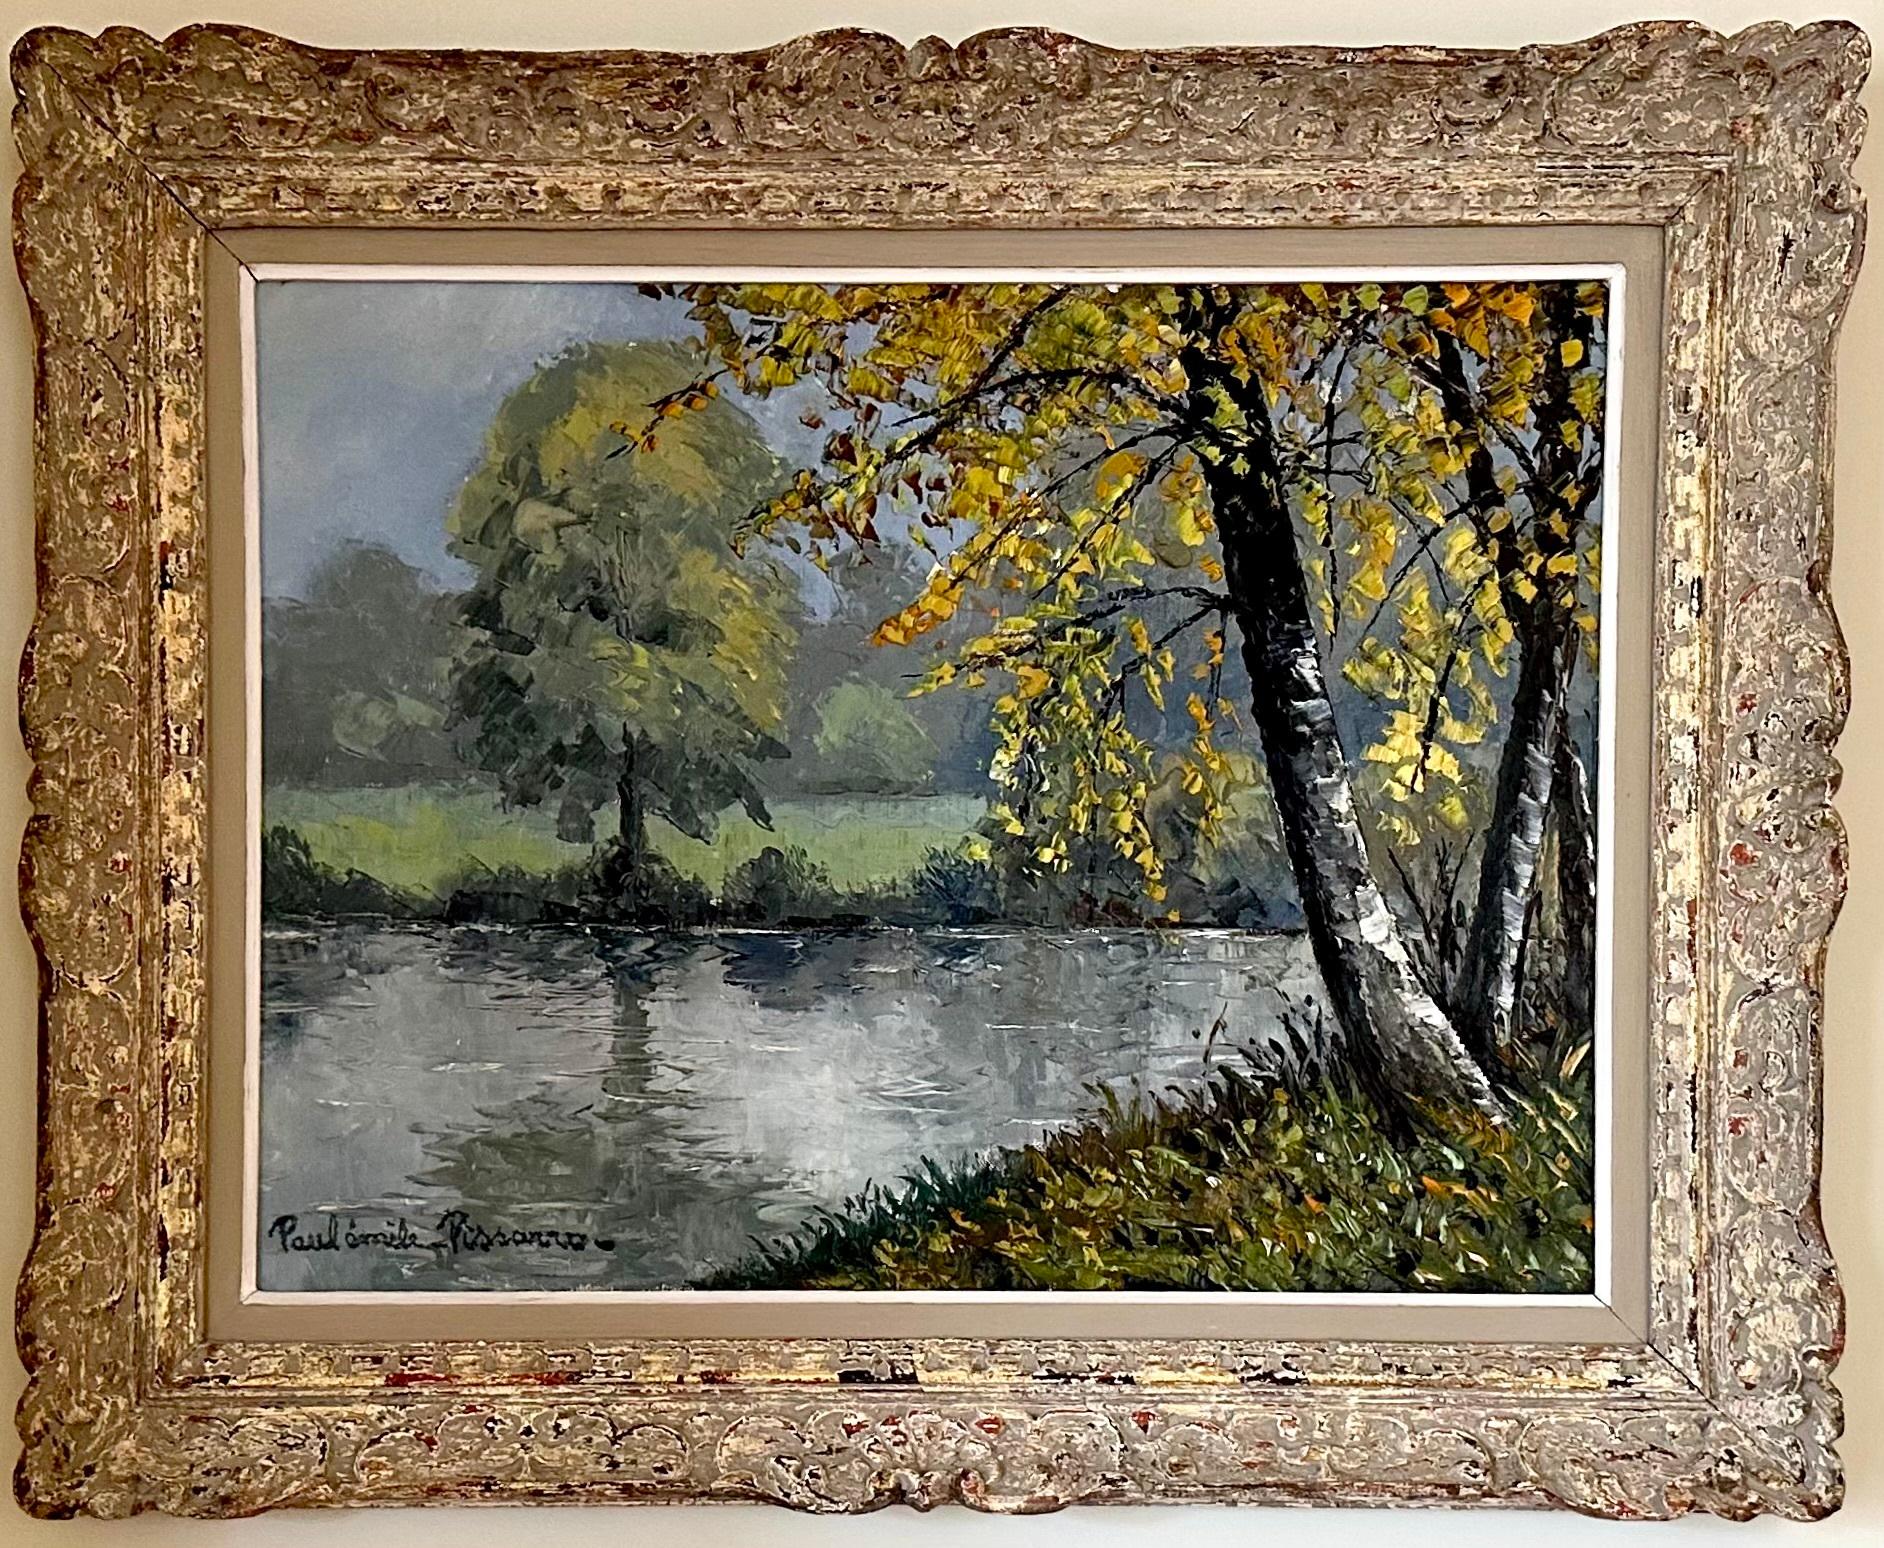 PAULÉMILE PISSARRO (1884-1972)
Novembre au bord de l’eau
Oil on canvas
46 x 61 cm (18 1/8 x 24 inches)
Signed, 
Painted circa 1950s

Paulémile Pissarro, Camille Pissarro’s youngest son, was born in Éragny in 1884 where he was brought up within the